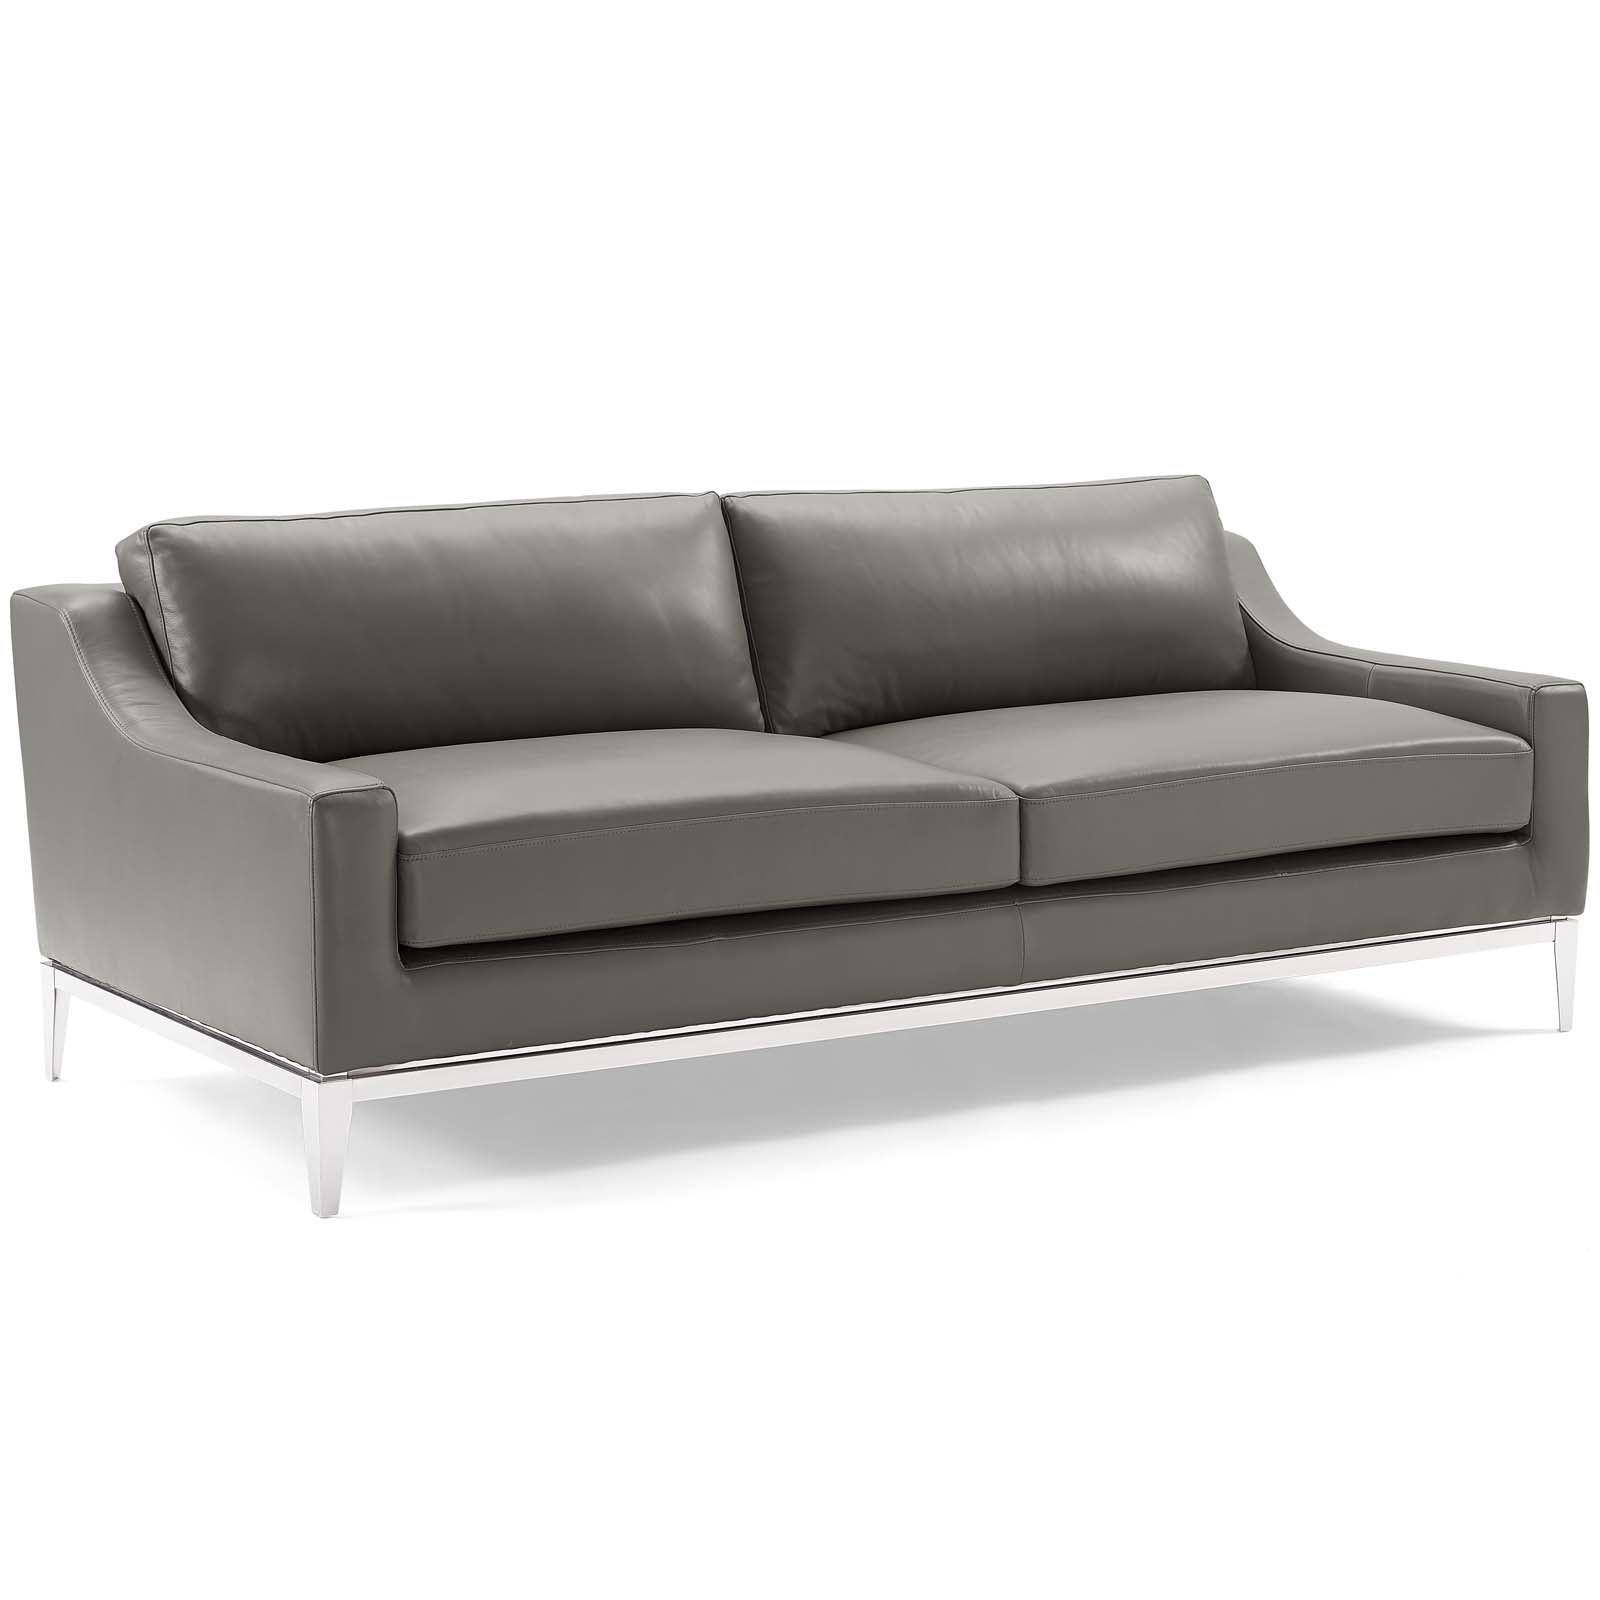 Harness Stainless Steel Base Leather Sofa & Armchair Set-Sofa Set-Modway-Wall2Wall Furnishings